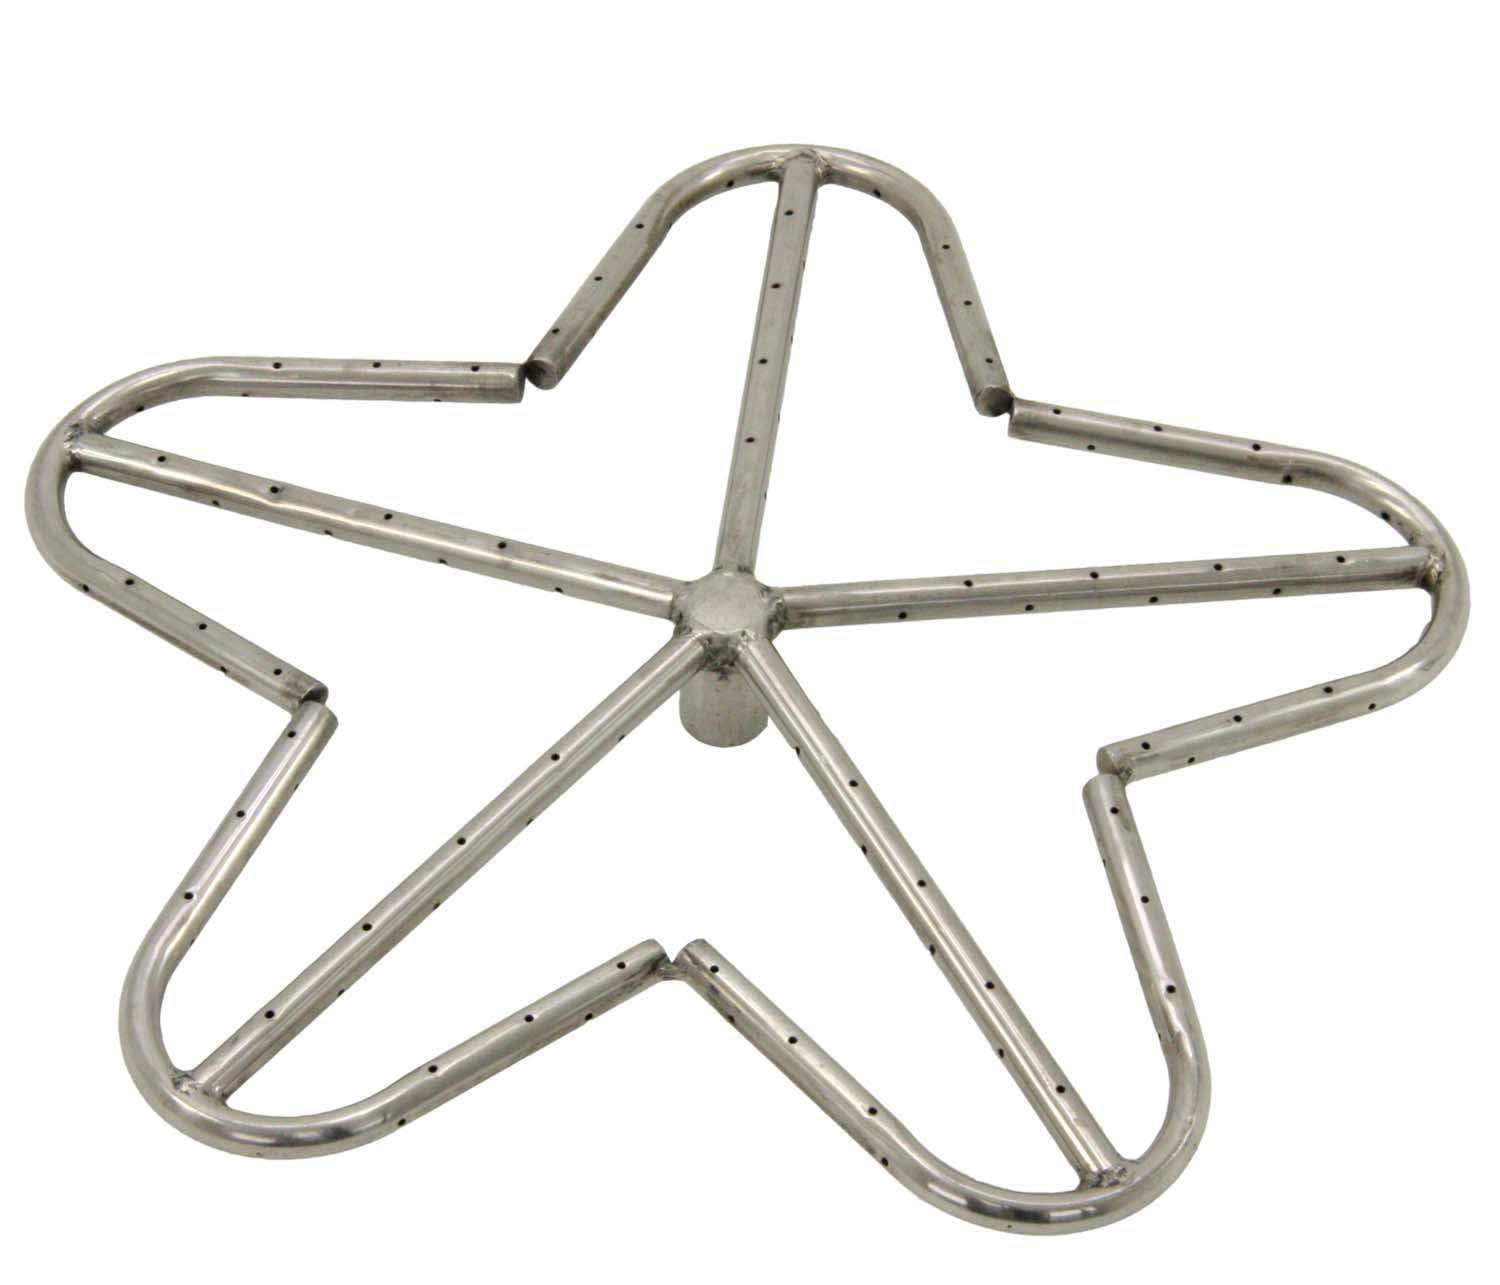 Hearth Products Controls HPC S-Fire Stainless Steel Fire Pit Burner, 60x10-Inch, Natural Gas 